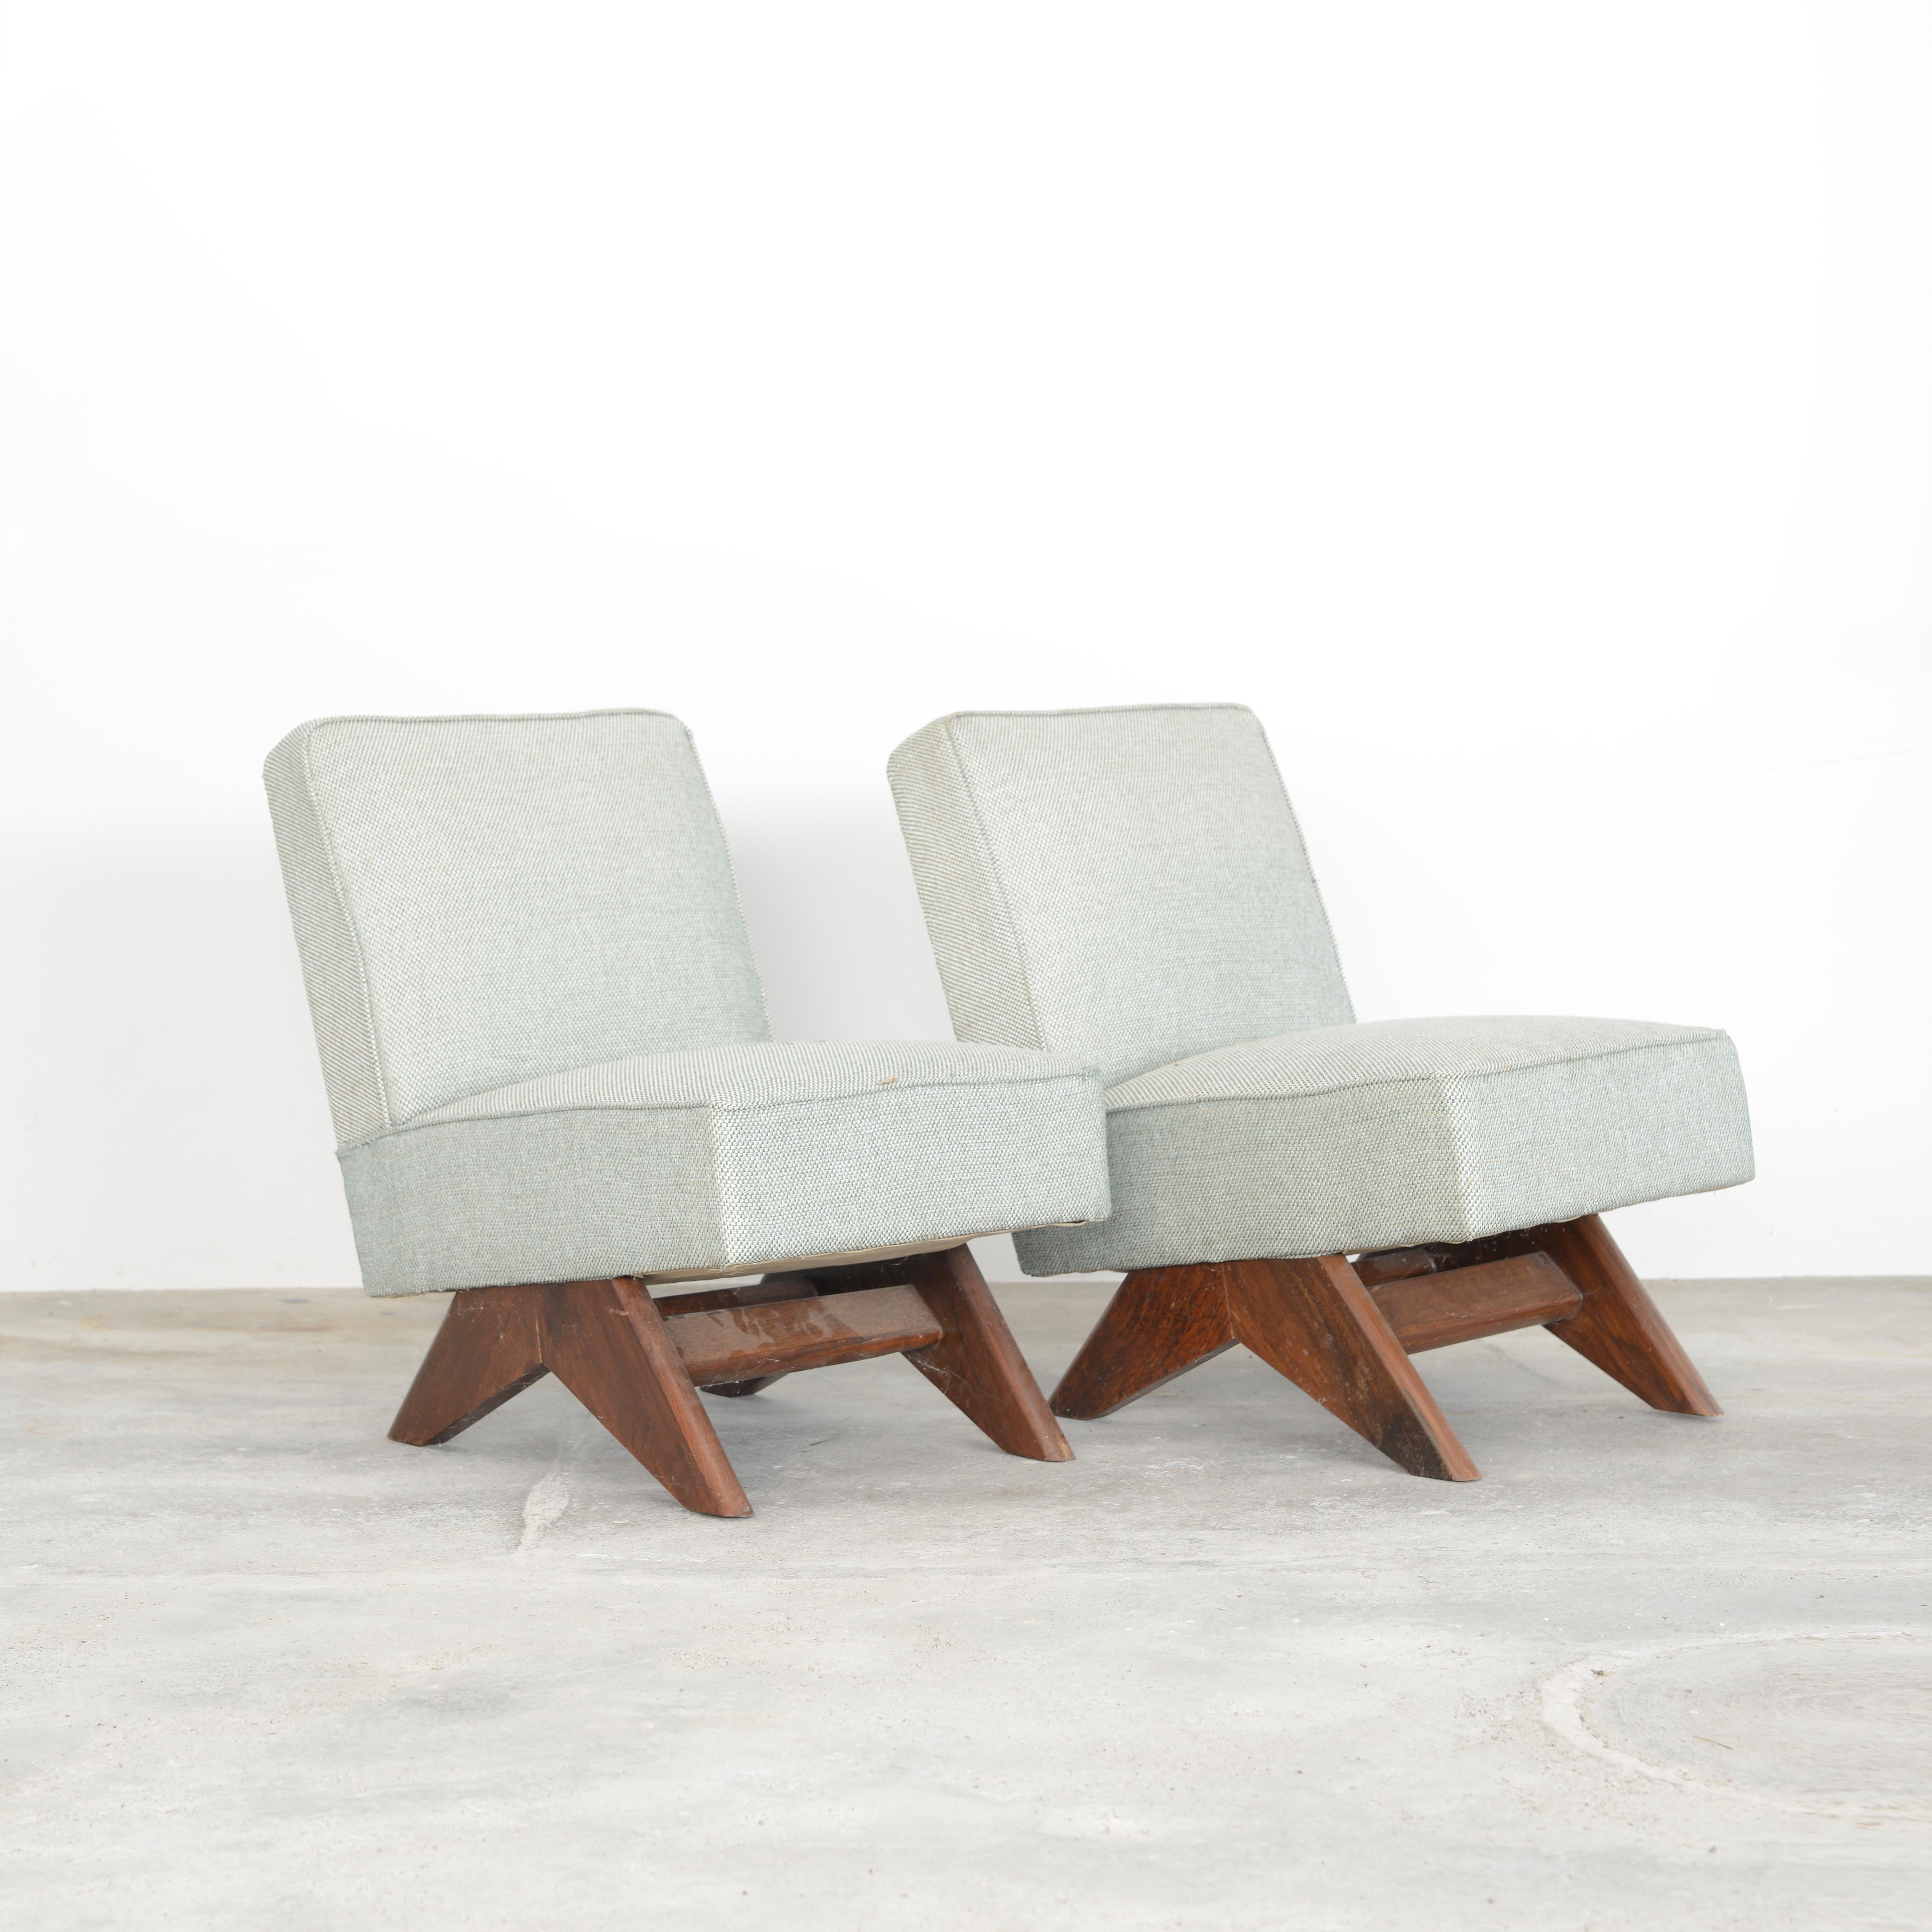 Two Pierre Jeanneret Sofa Chairs / Authentic Mid-Century Modern, Chandigarh For Sale 1